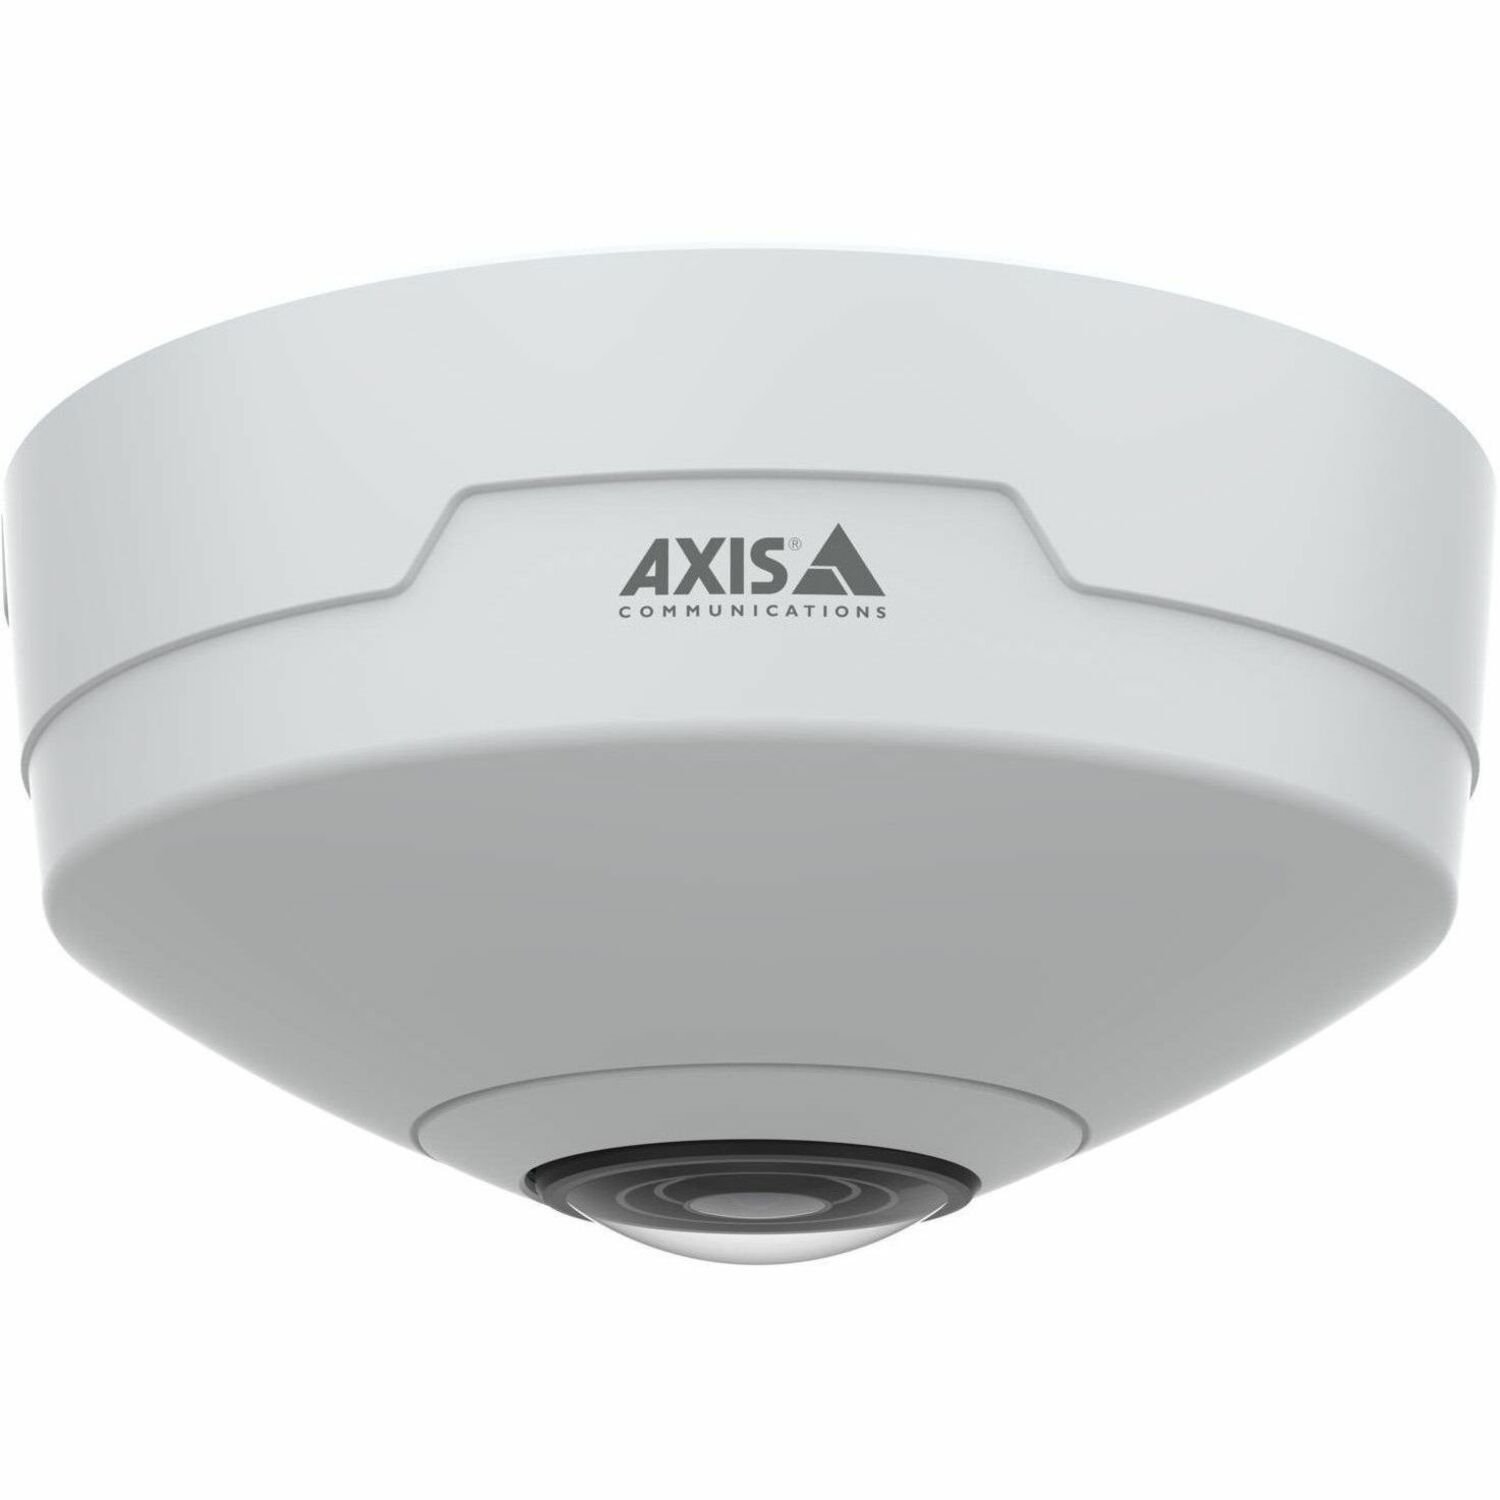 AXIS M4327-P 6 Megapixel Indoor Network Camera - Color - Fisheye - White - TAA Compliant